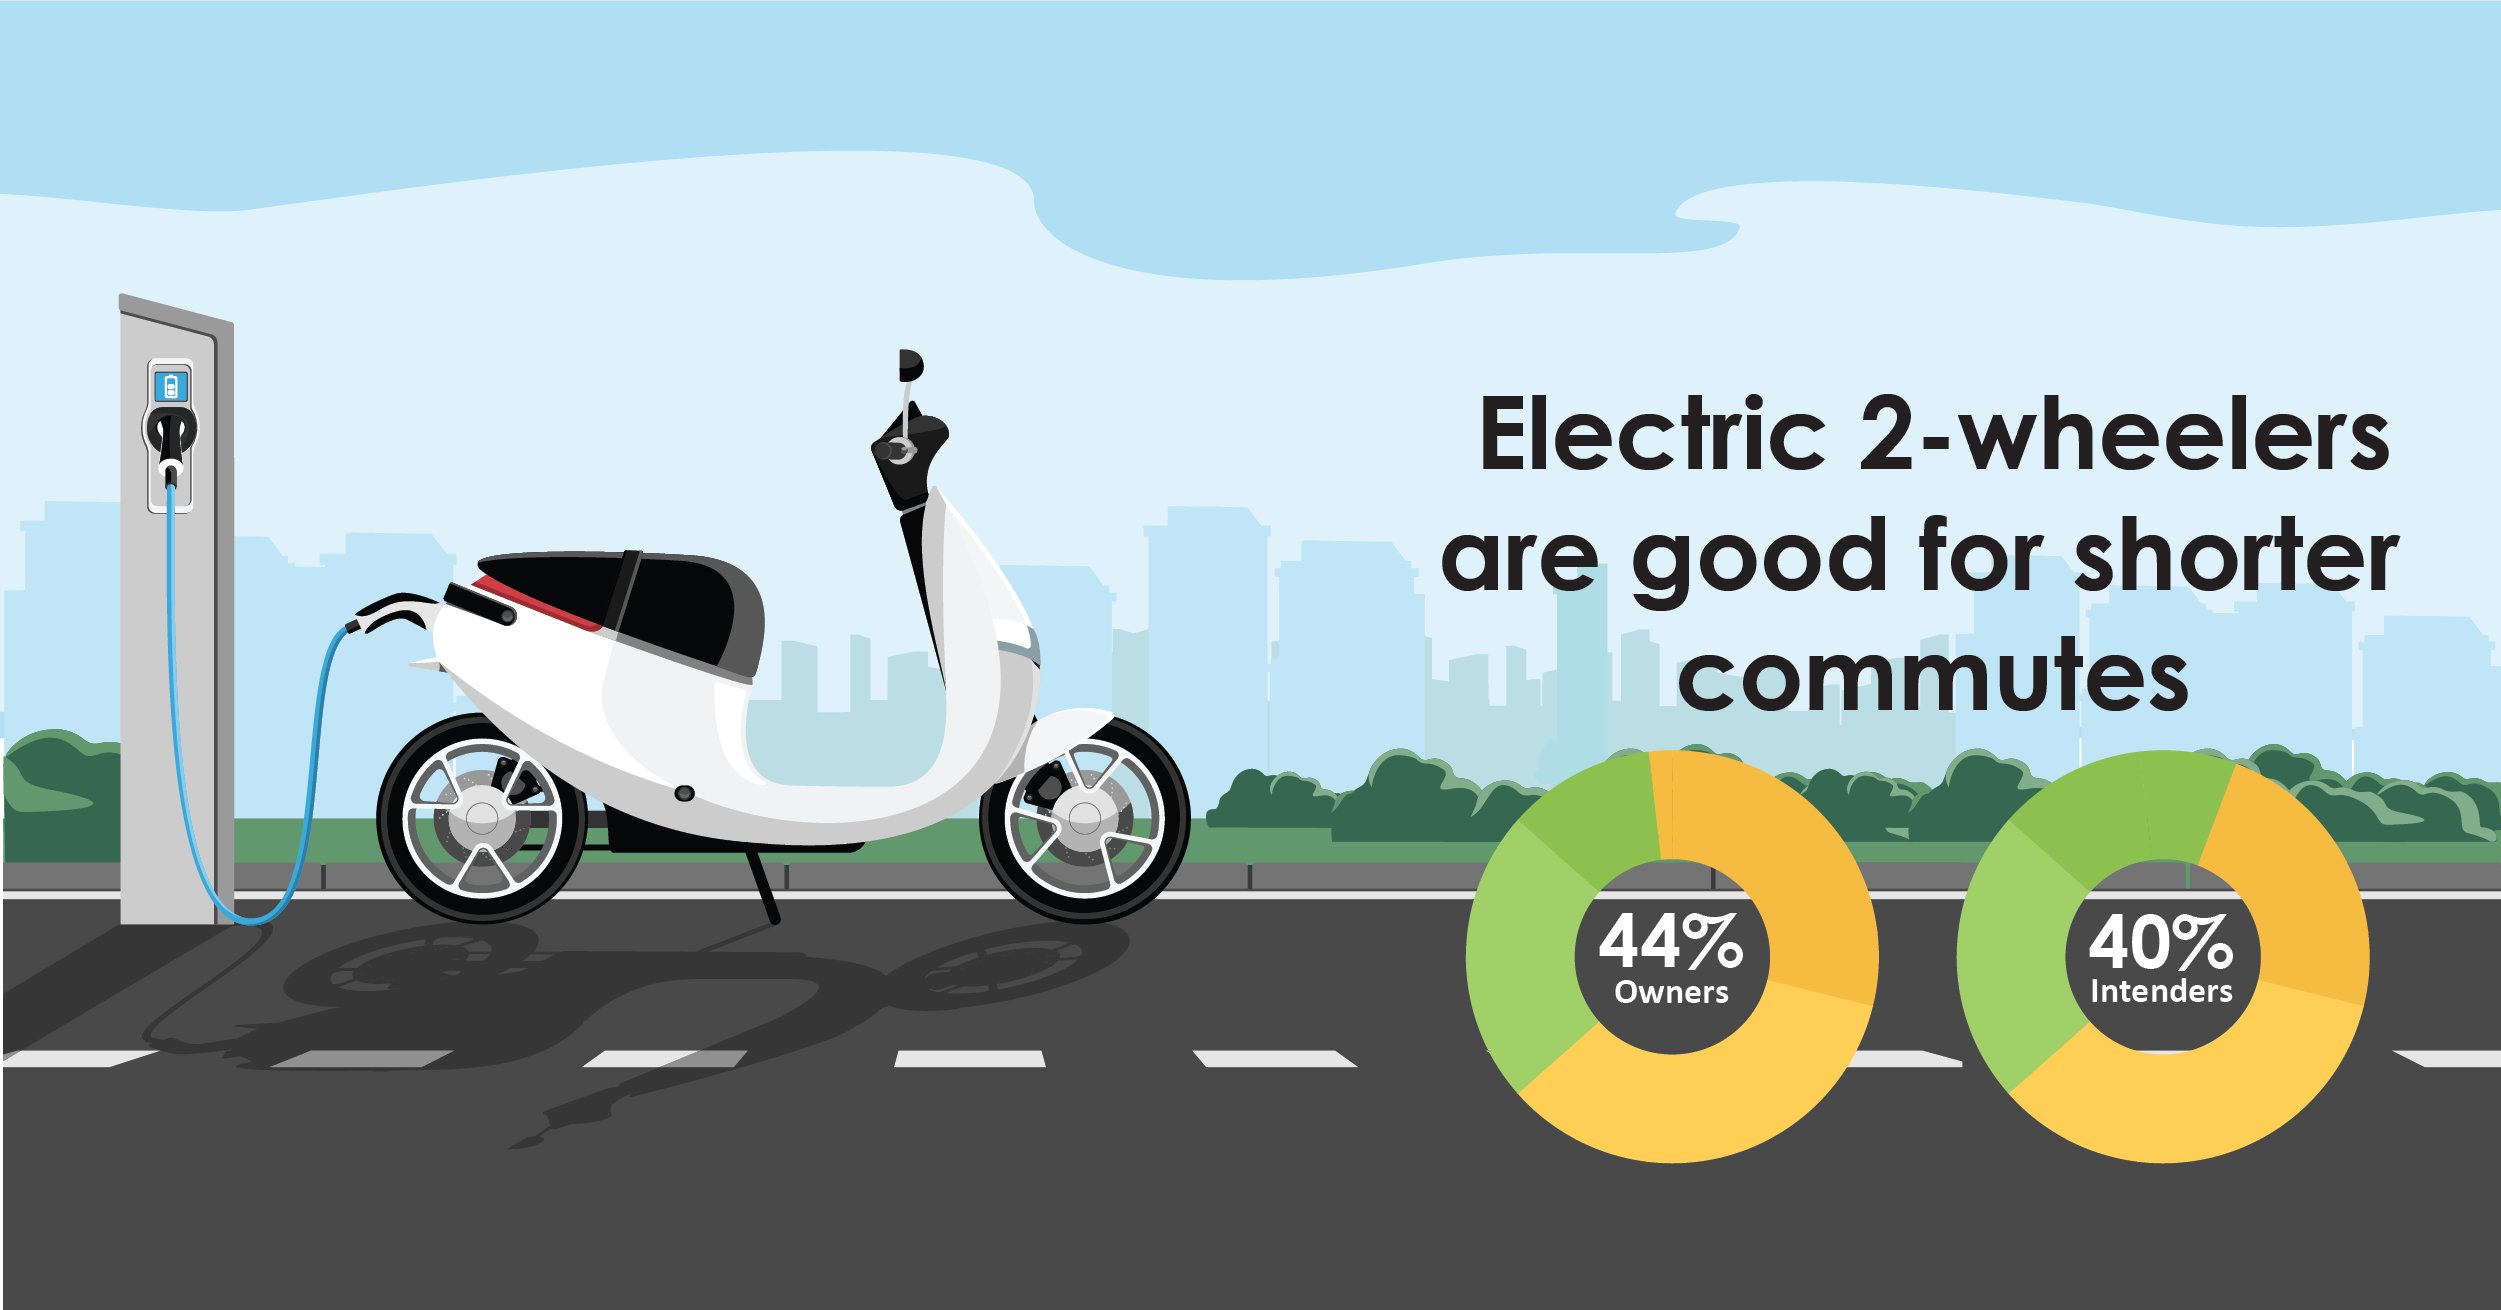 electric 2-wheelers for shorter commutes